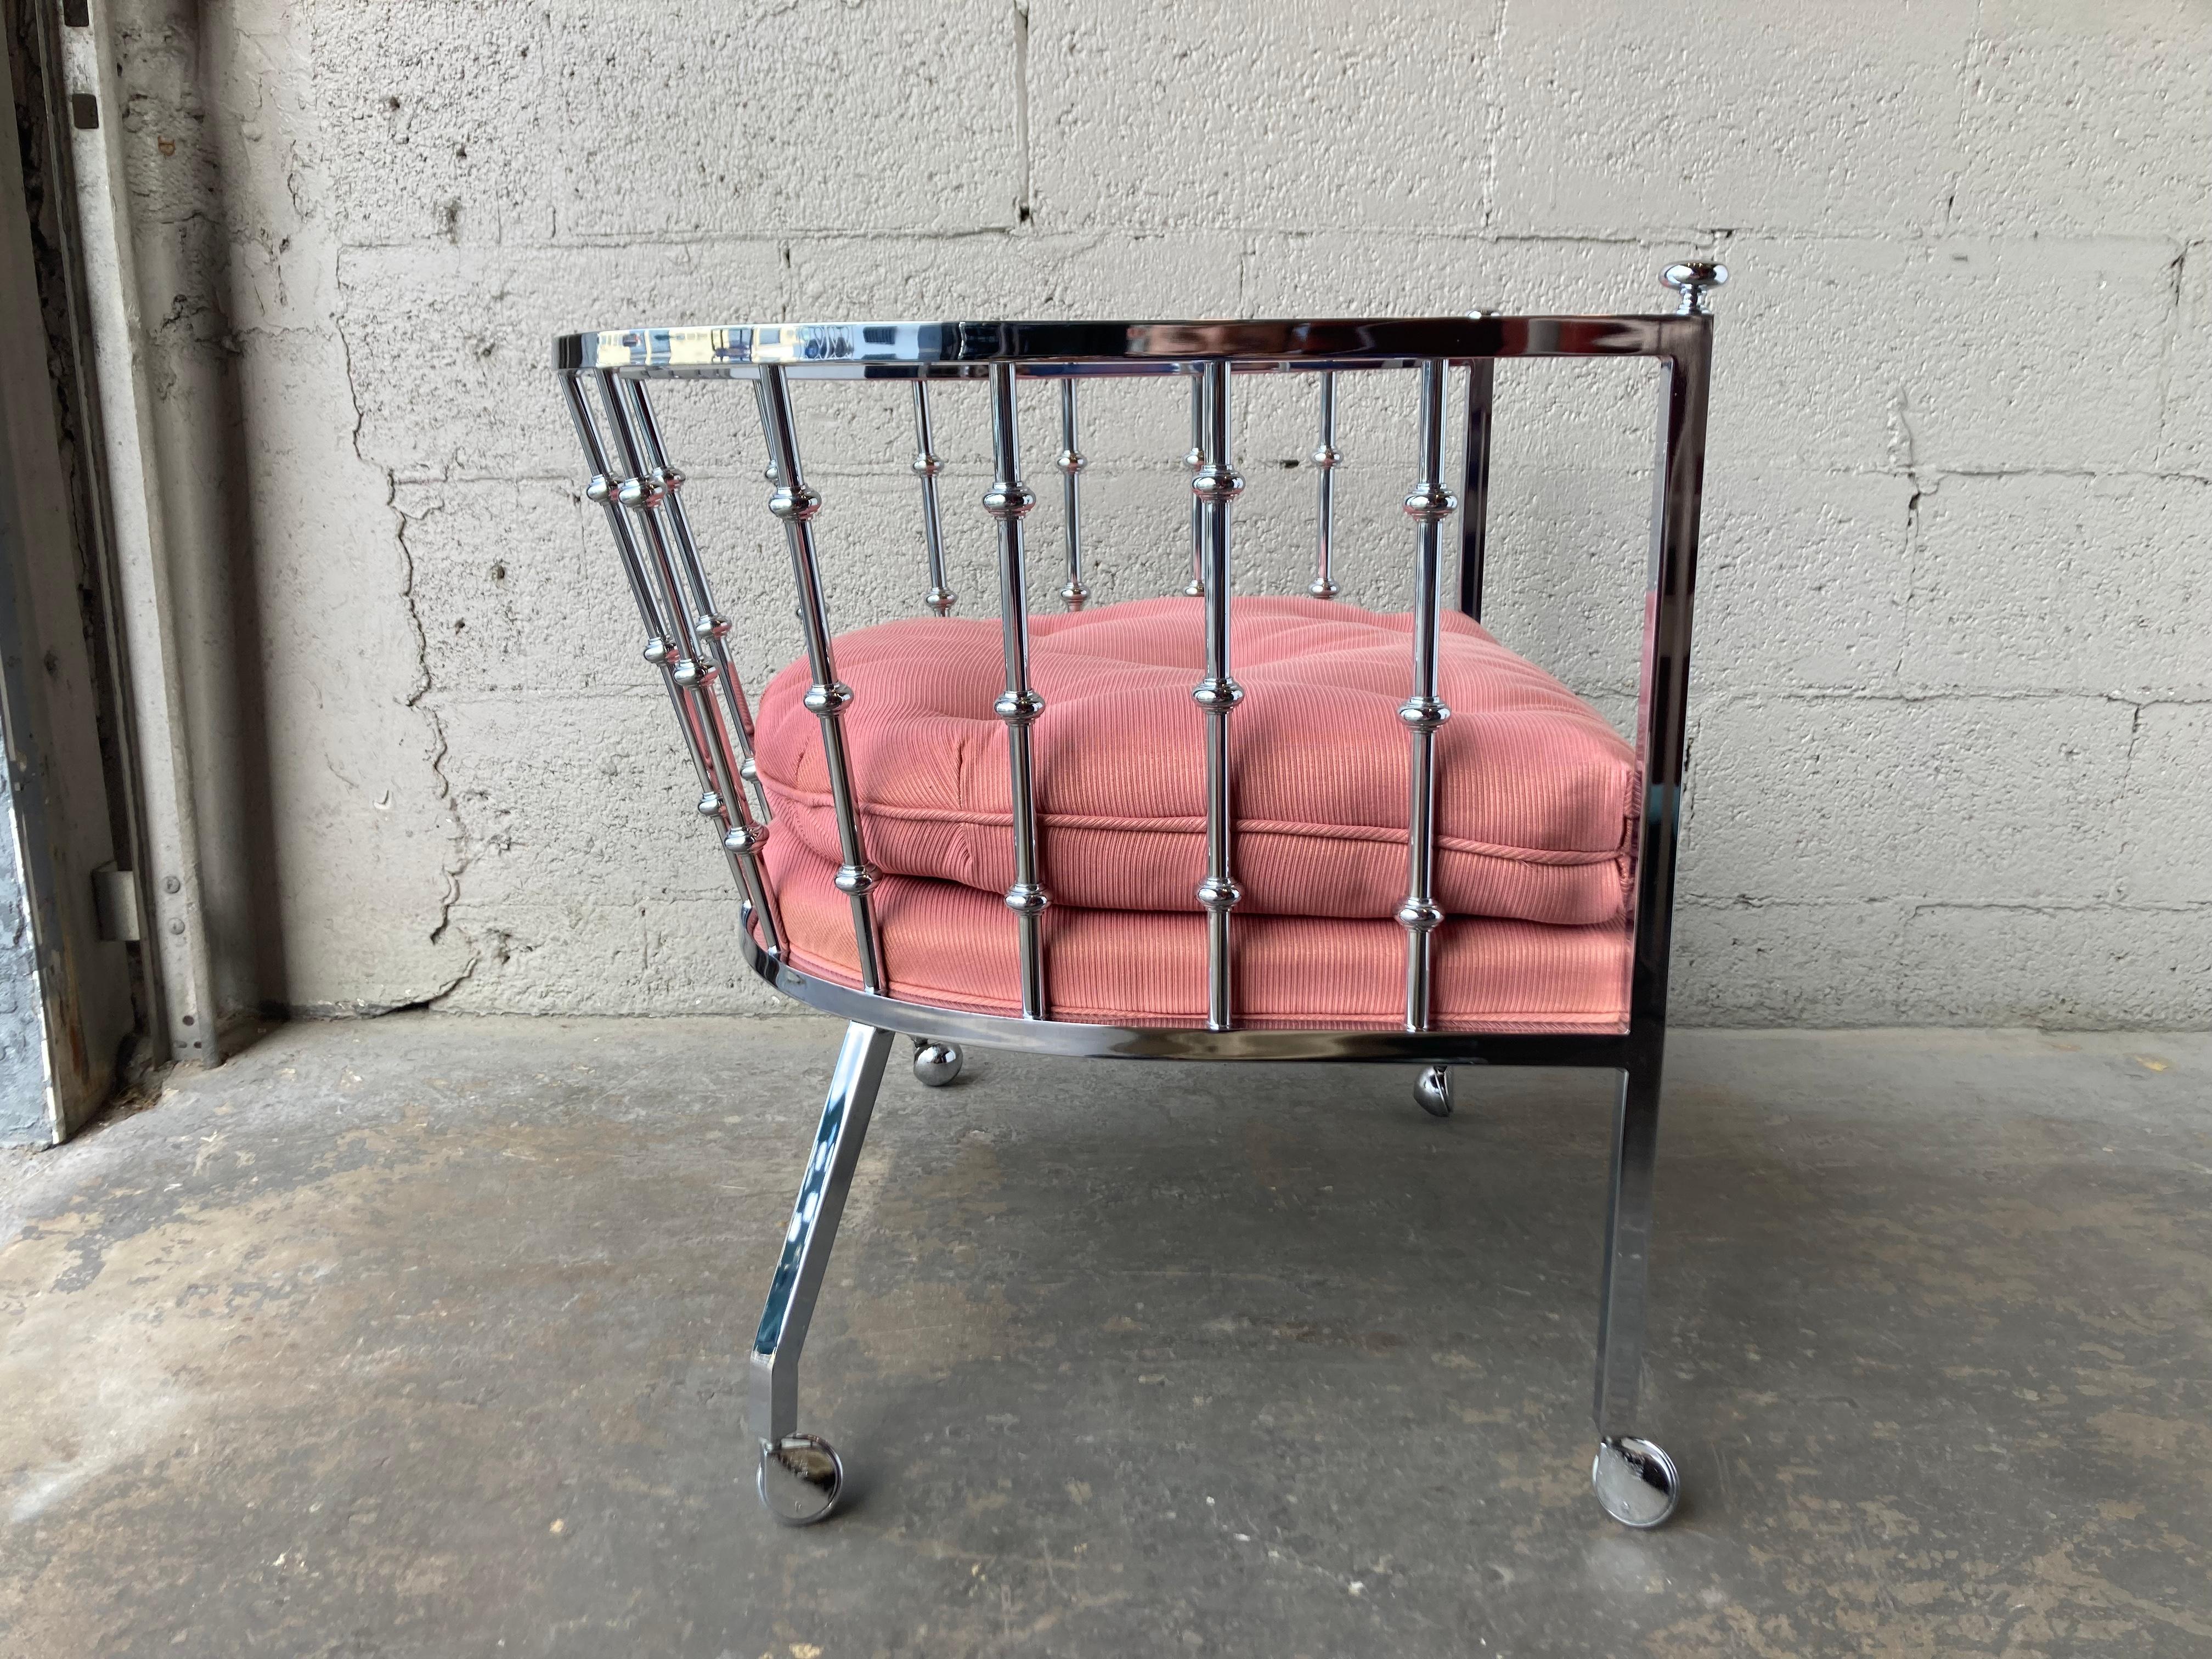 Original Mid Century Modern Chrome Lounge Chair on casters, in original good condition. Ready for a new home.